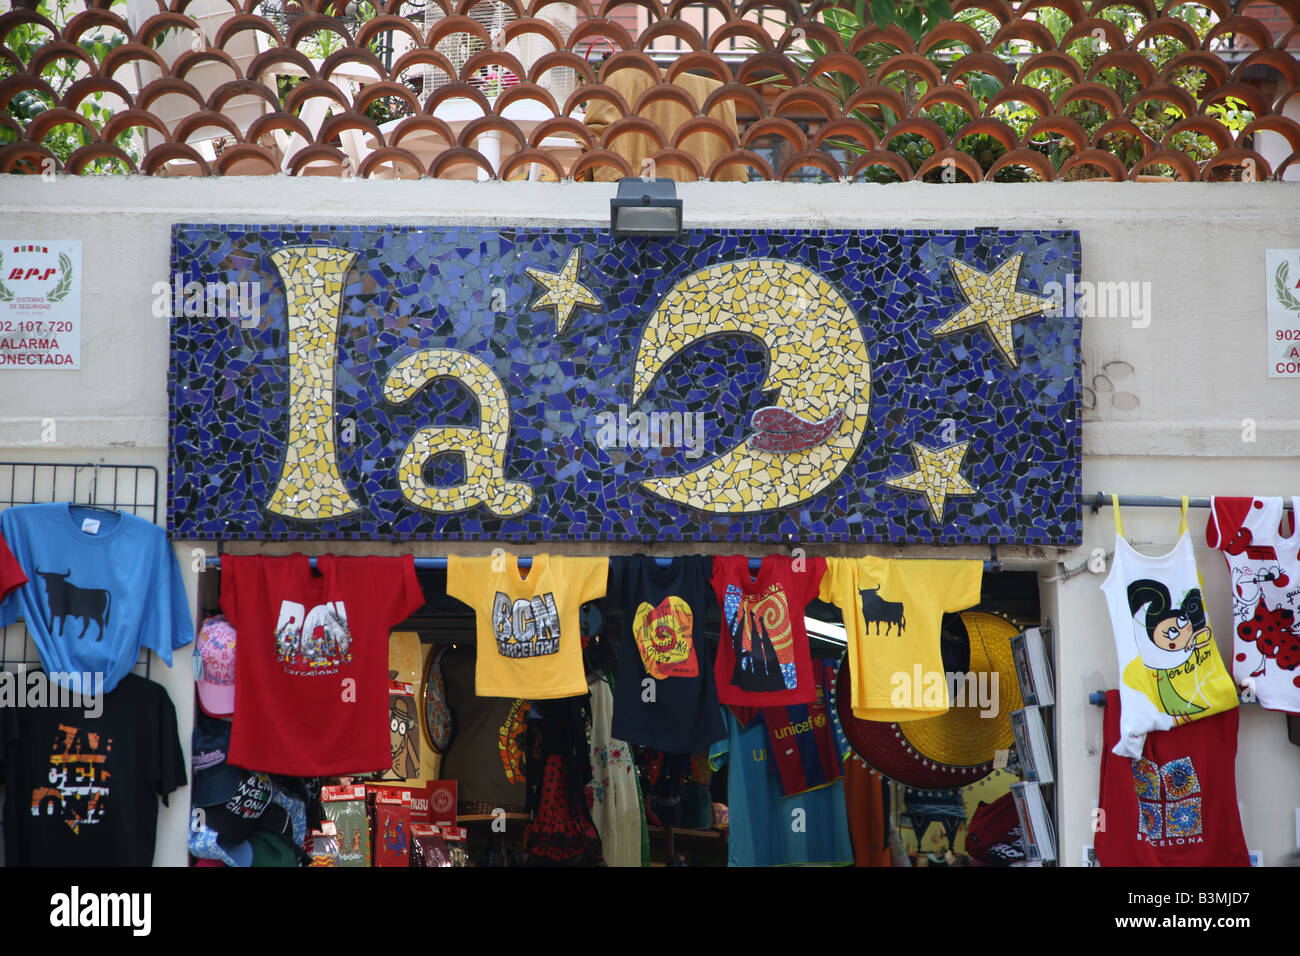 The Moon clothes shop.  Colourful street display of wares in Barcelona Stock Photo